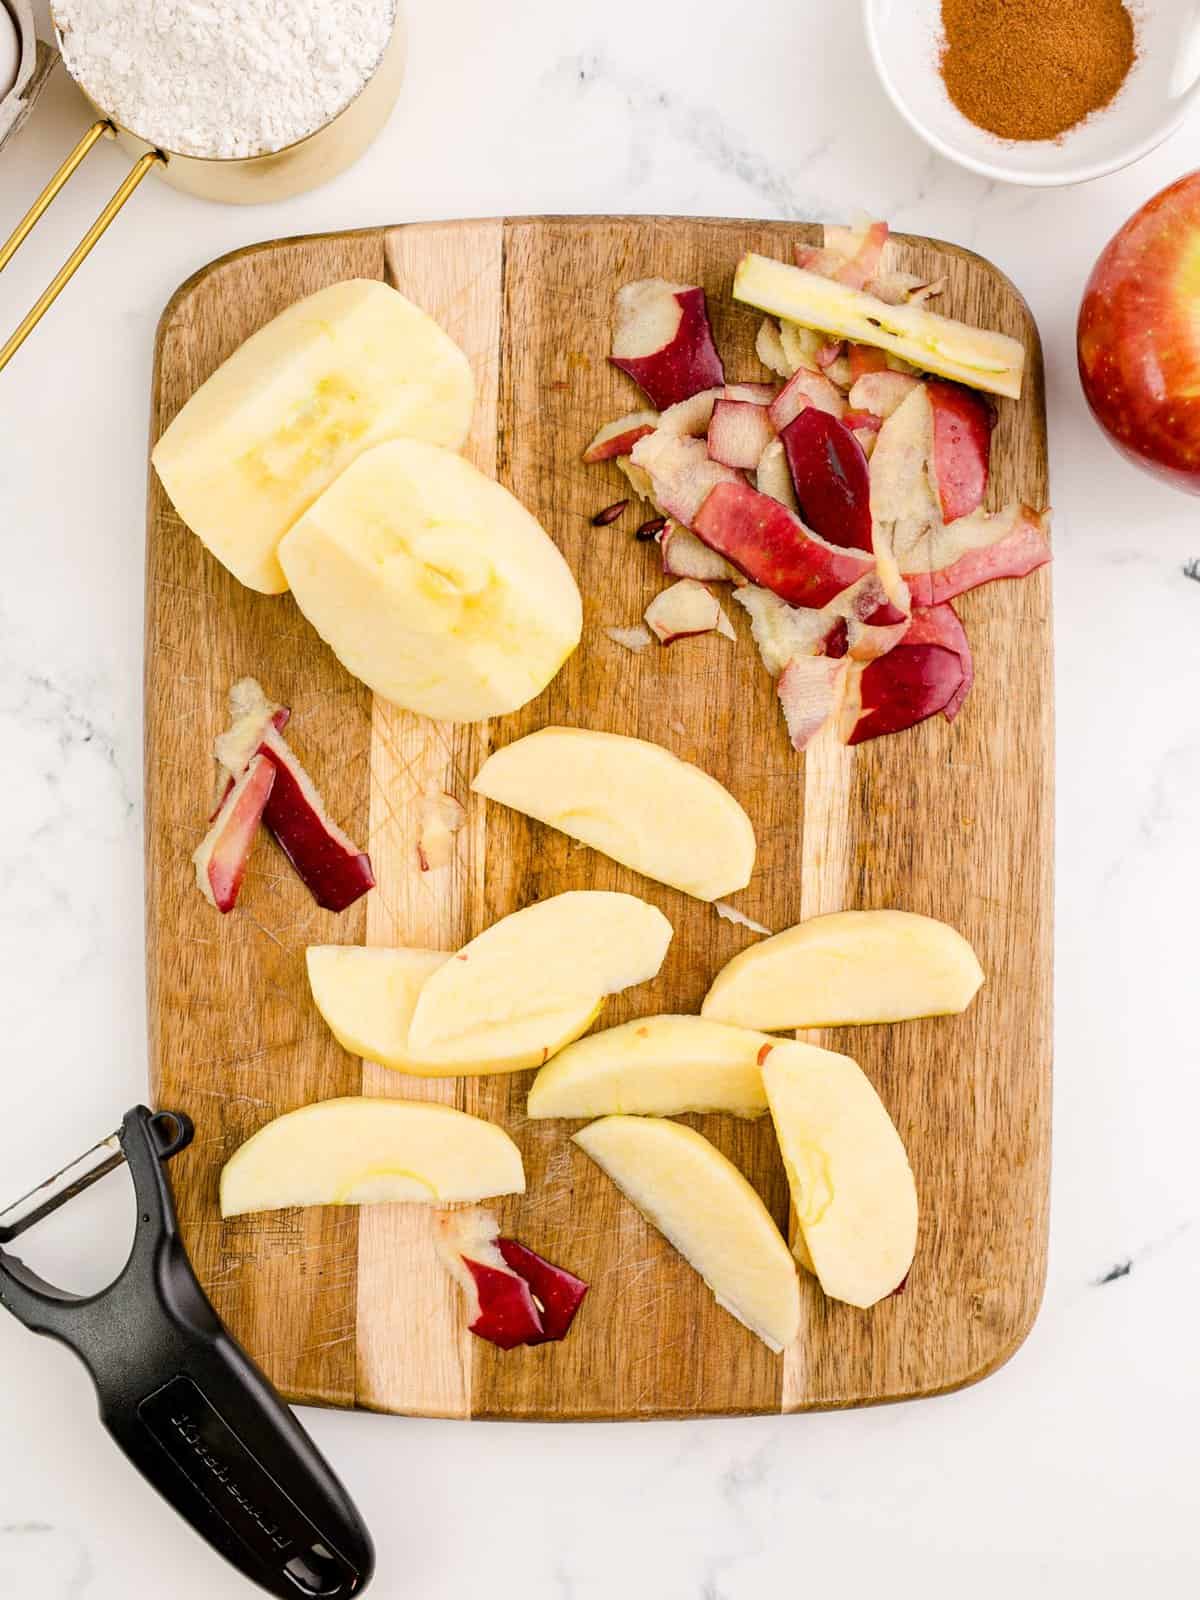 Apples peeled, cored and sliced on cutting board.